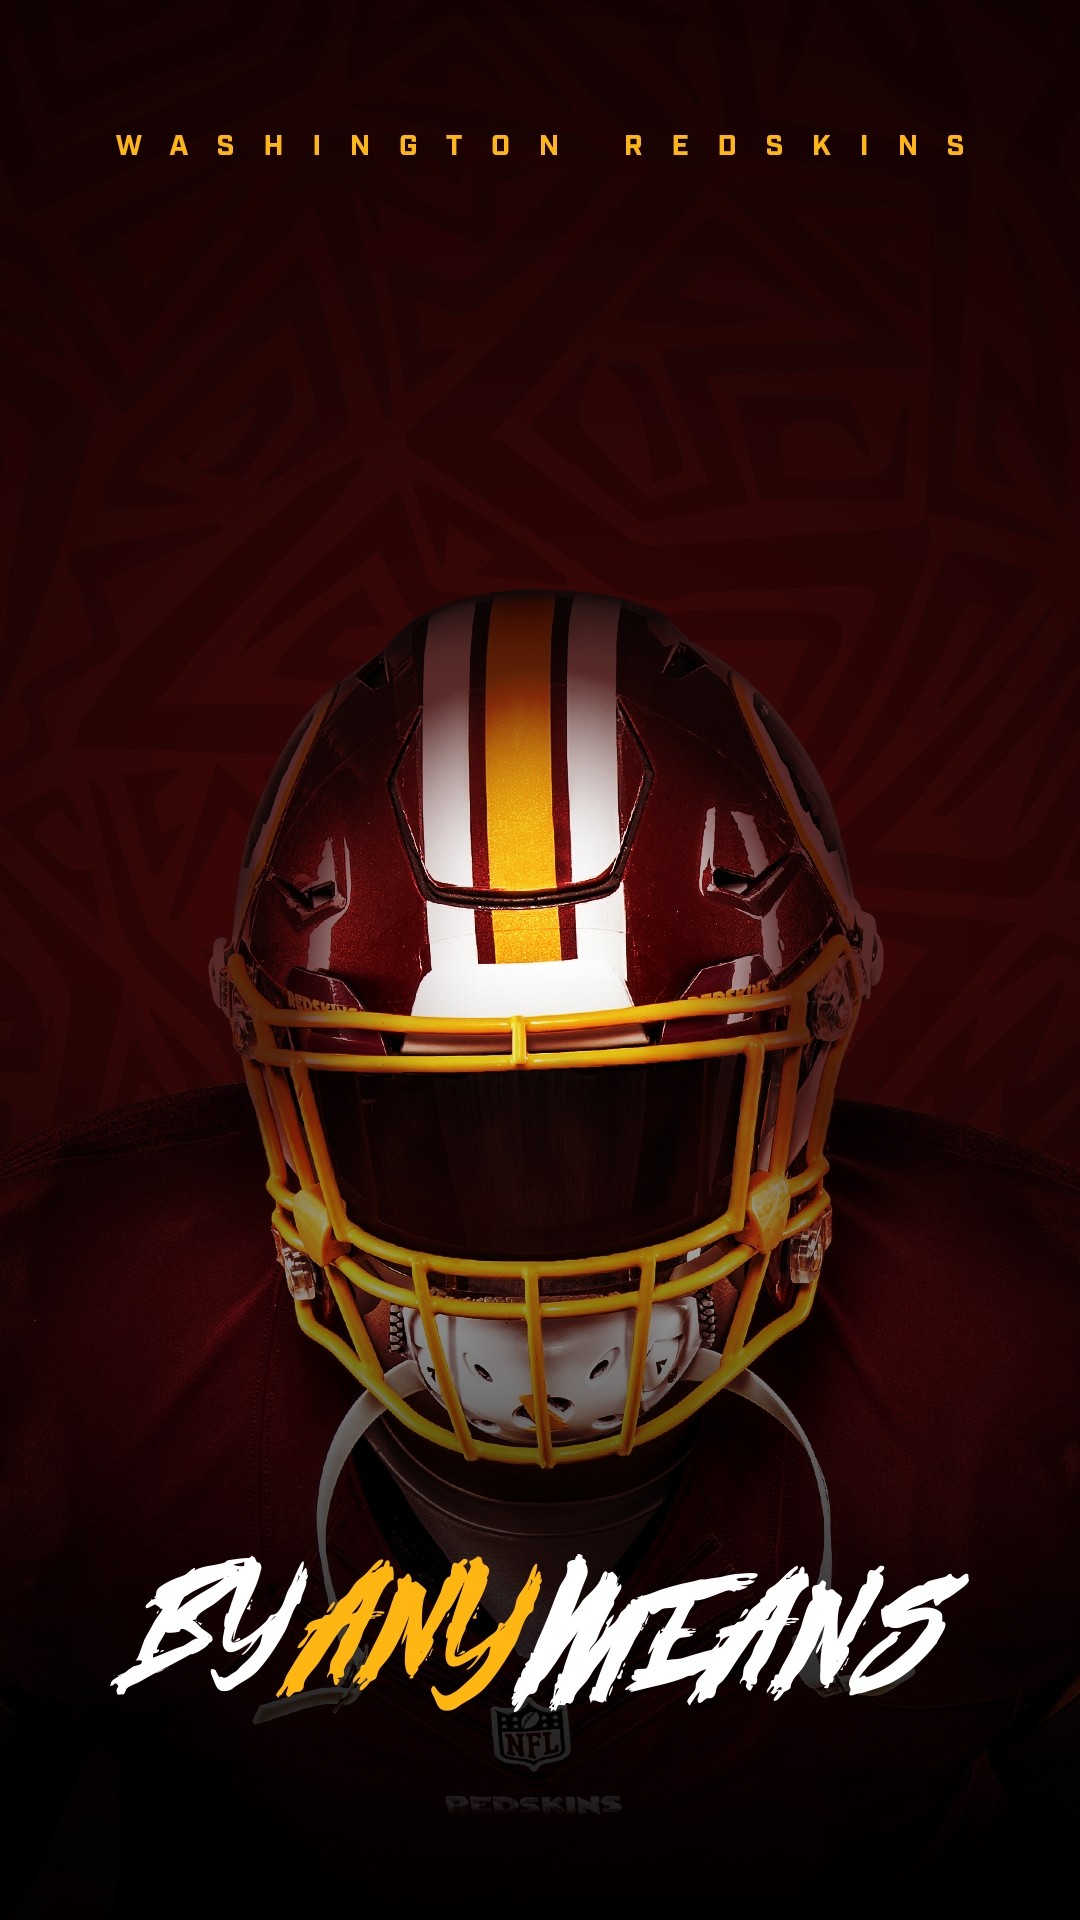 Washington Redskins iPhone 7 Plus Wallpaper With high-resolution 1080X1920 pixel. You can use this wallpaper for your Mac or Windows Desktop Background, iPhone, Android or Tablet and another Smartphone device